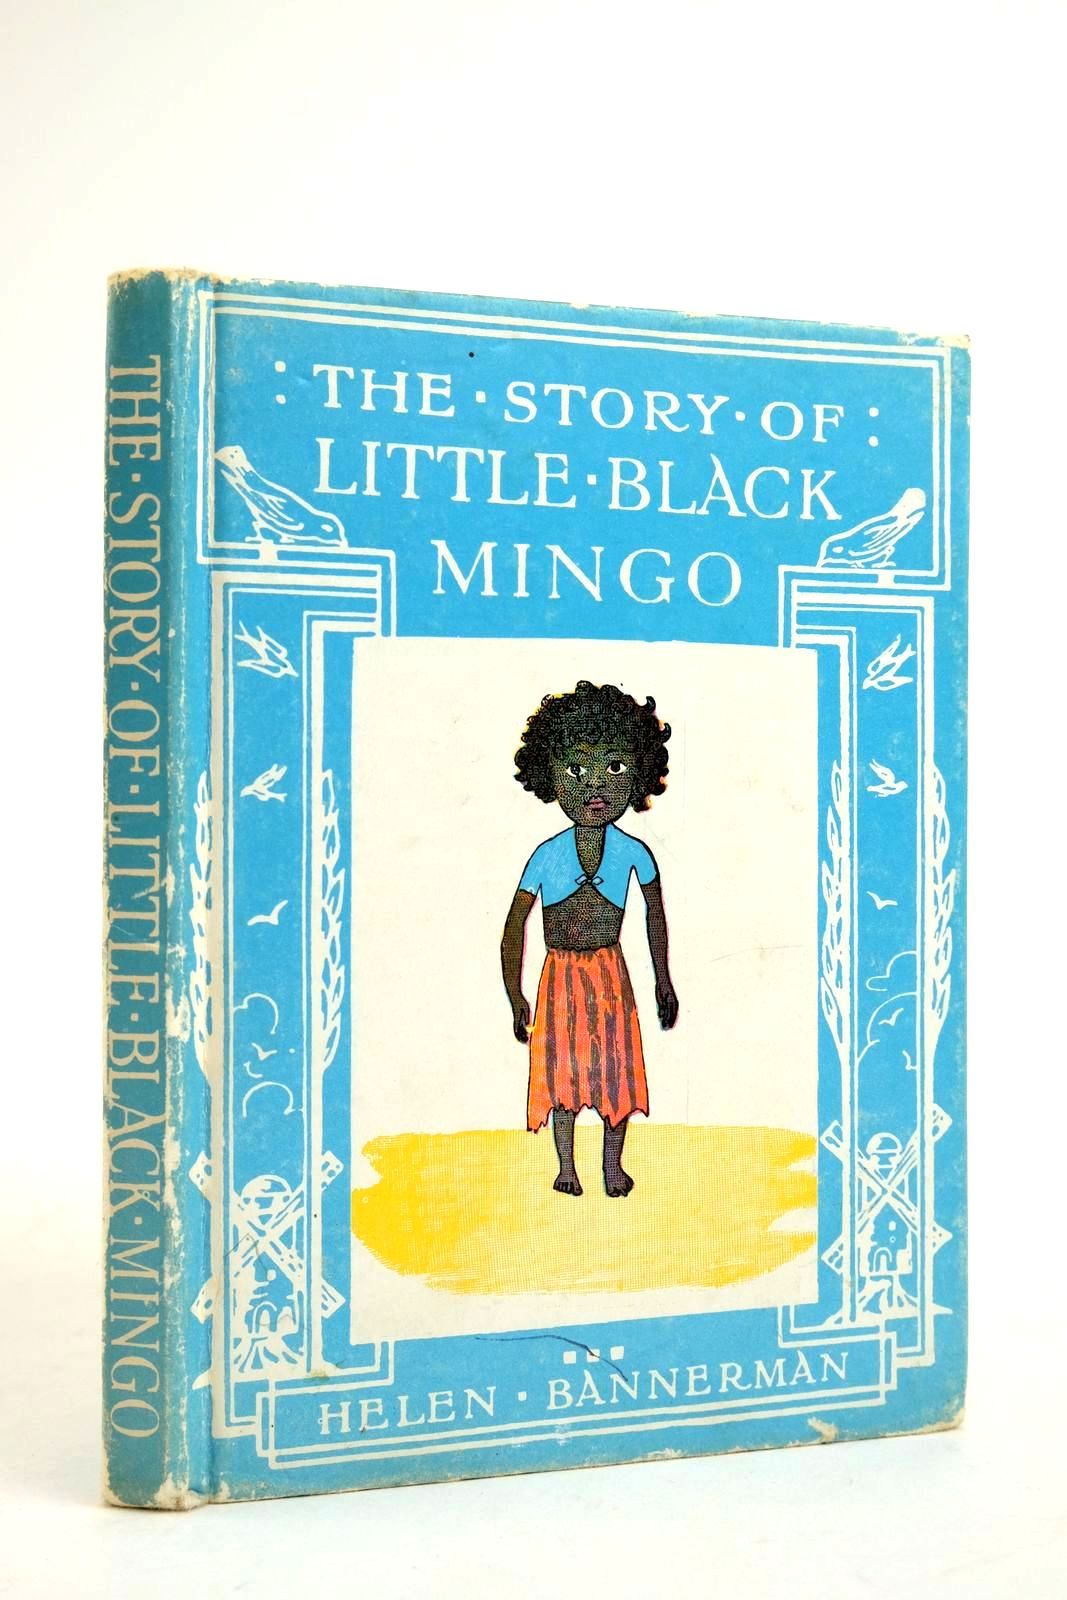 Photo of THE STORY OF LITTLE BLACK MINGO written by Bannerman, Helen illustrated by Bannerman, Helen published by Chatto & Windus (STOCK CODE: 2135791)  for sale by Stella & Rose's Books